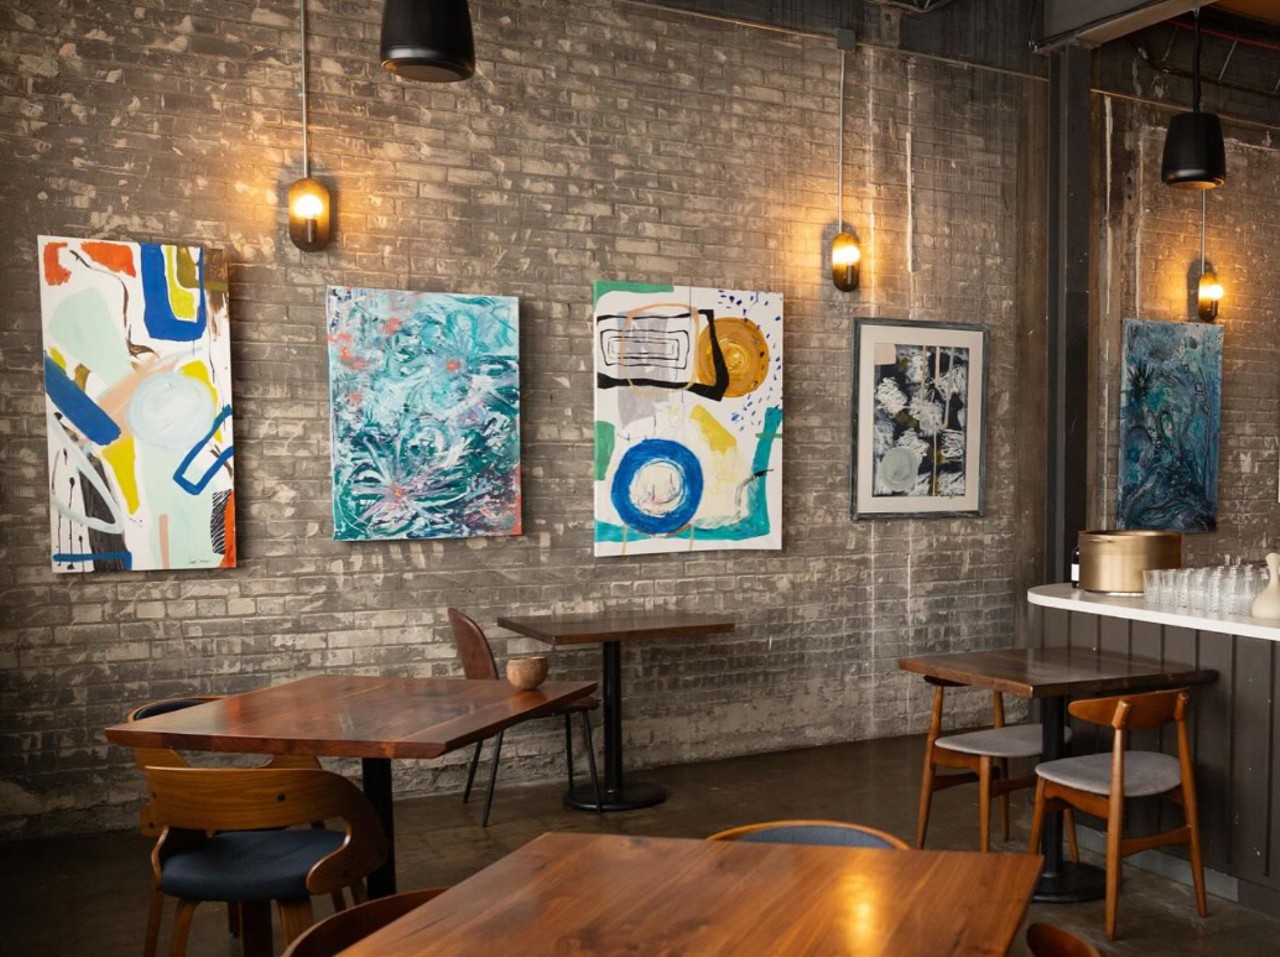 
Community Hour: A Celebration of the Arts
When: April 7 from 6-10 p.m.
Where: Freya & Dragonfly (Detroit)
What: A celebration of art, food, and connection
Who: Local artists and chefs
Why: The quarterly celebration opens up both adjacent spaces with one menu. The event is free and open to the public with à la carte food and drinks. $20 presale tickets include one plate and cocktail, and a $20 discount on the artwork. The current show “Synergy” will close on April 22.